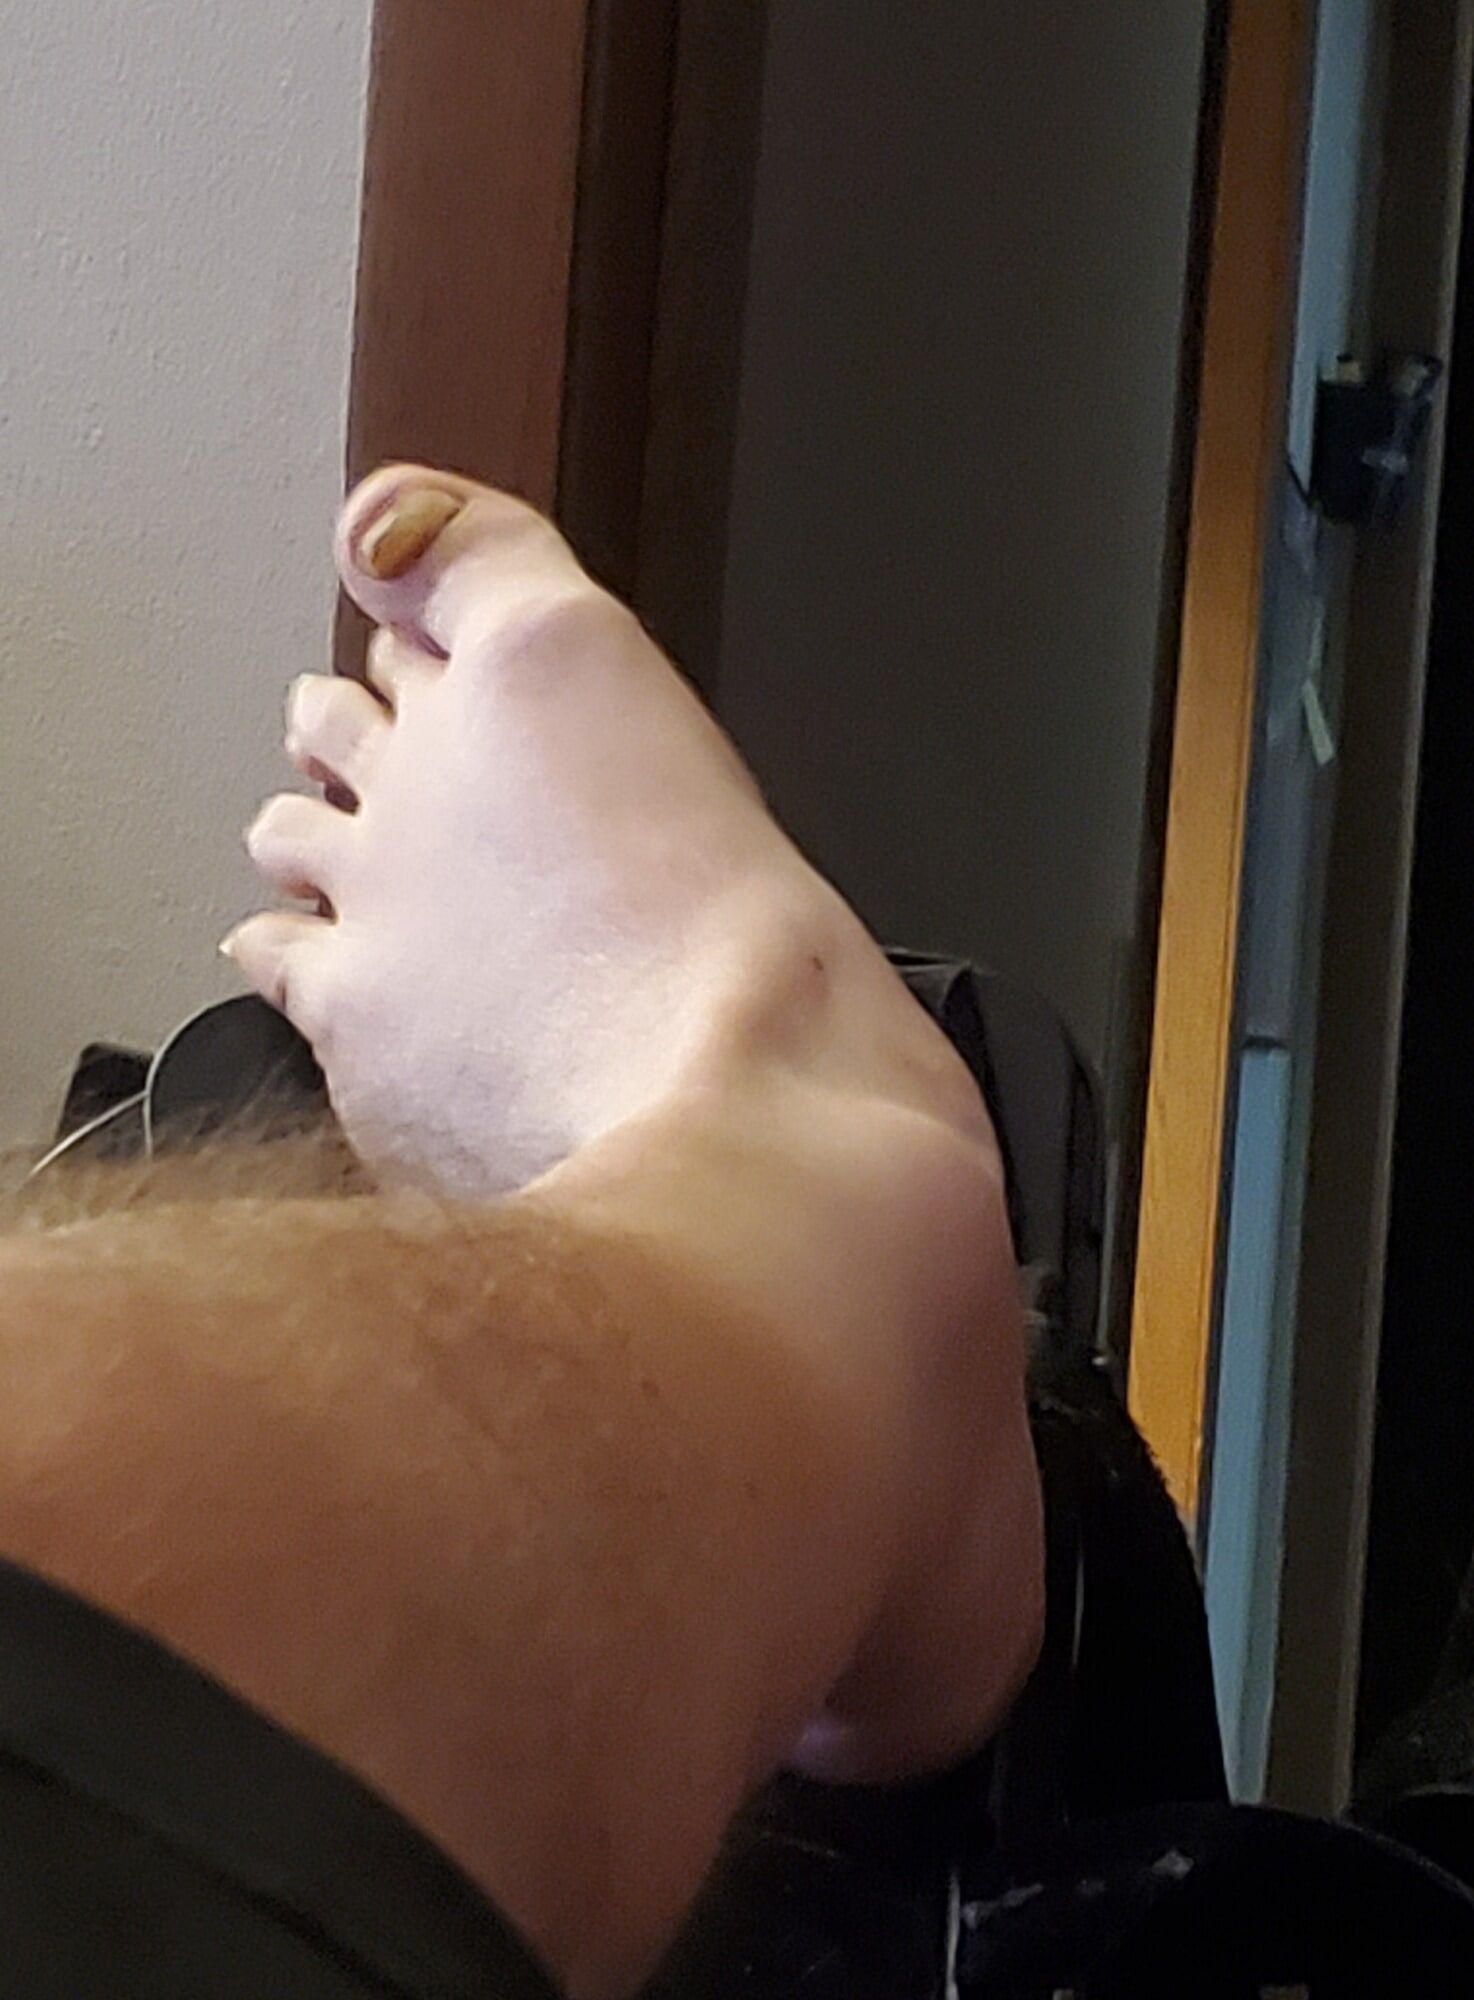 It's me and my feet #7